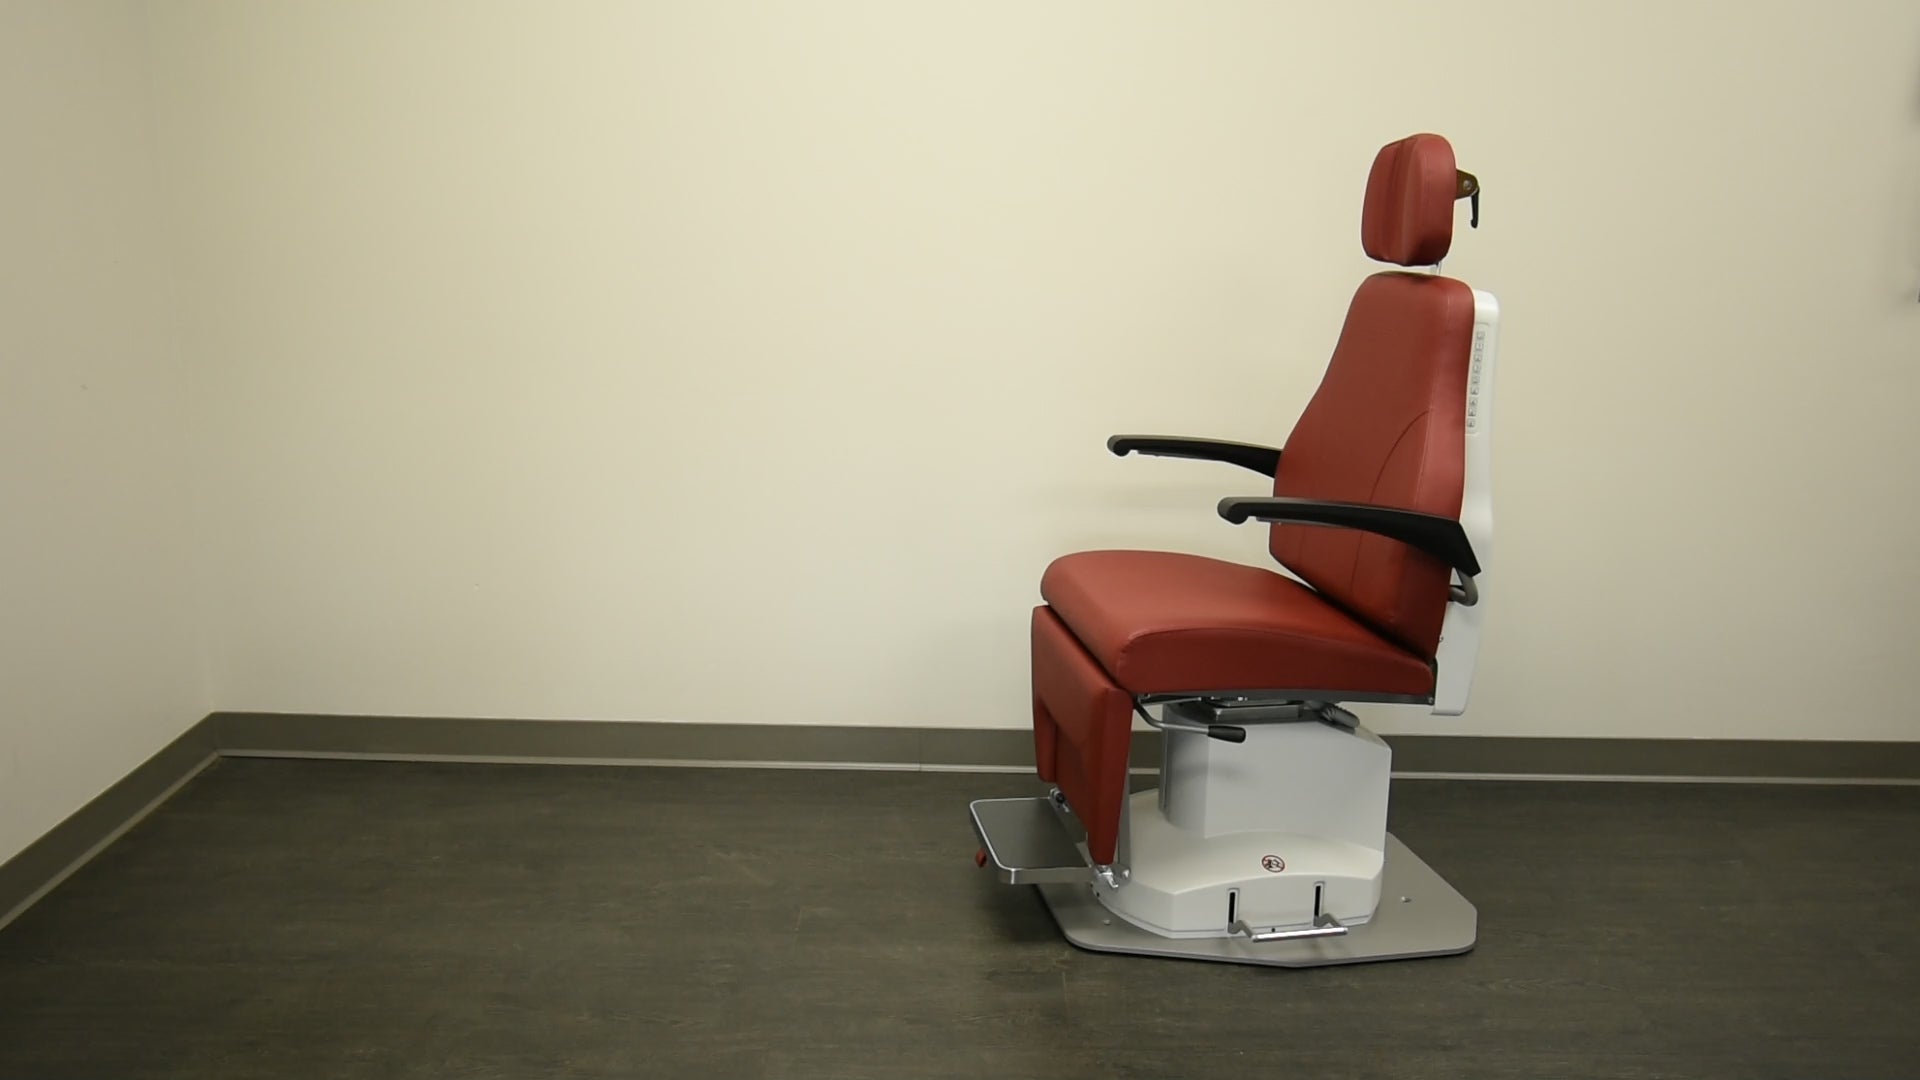 The Phoenix IV Full Power Mobile Chair can be easily moved from office to office, for cleaning, or furniture rearrangement.